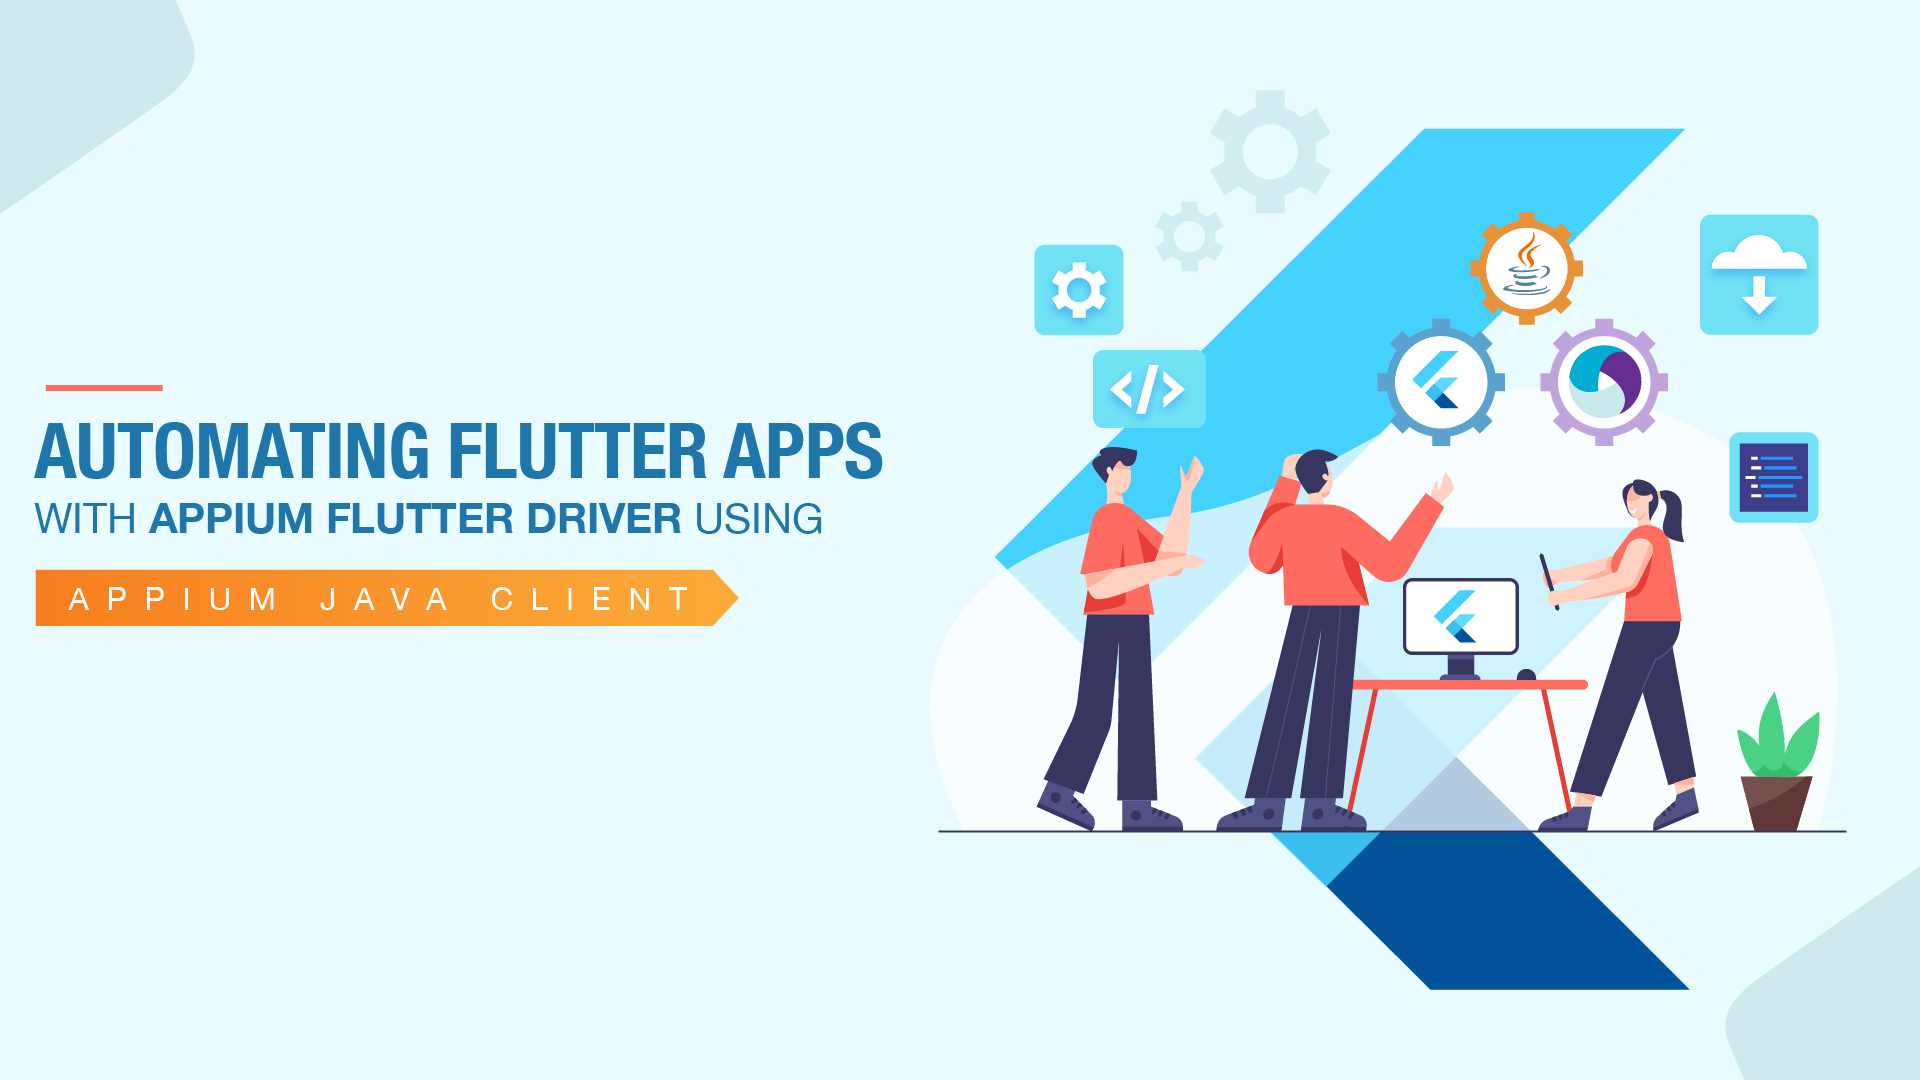 Automating Flutter Apps with Appium Flutter Driver using Appium Java Client